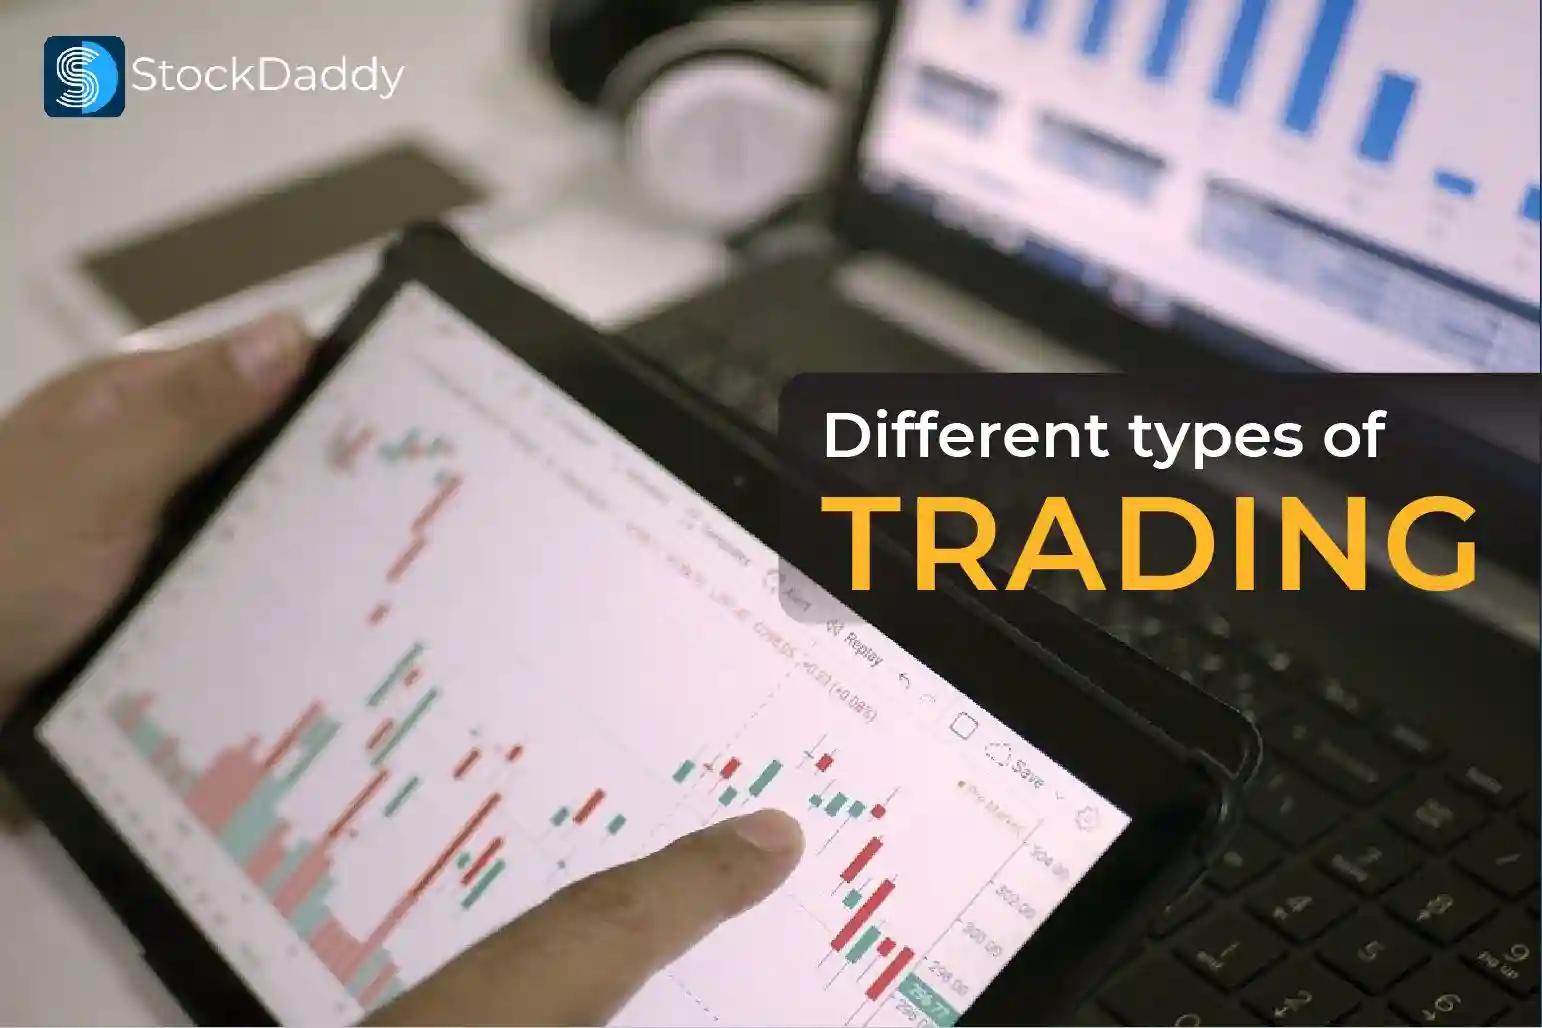 What are Different Types of Trading?